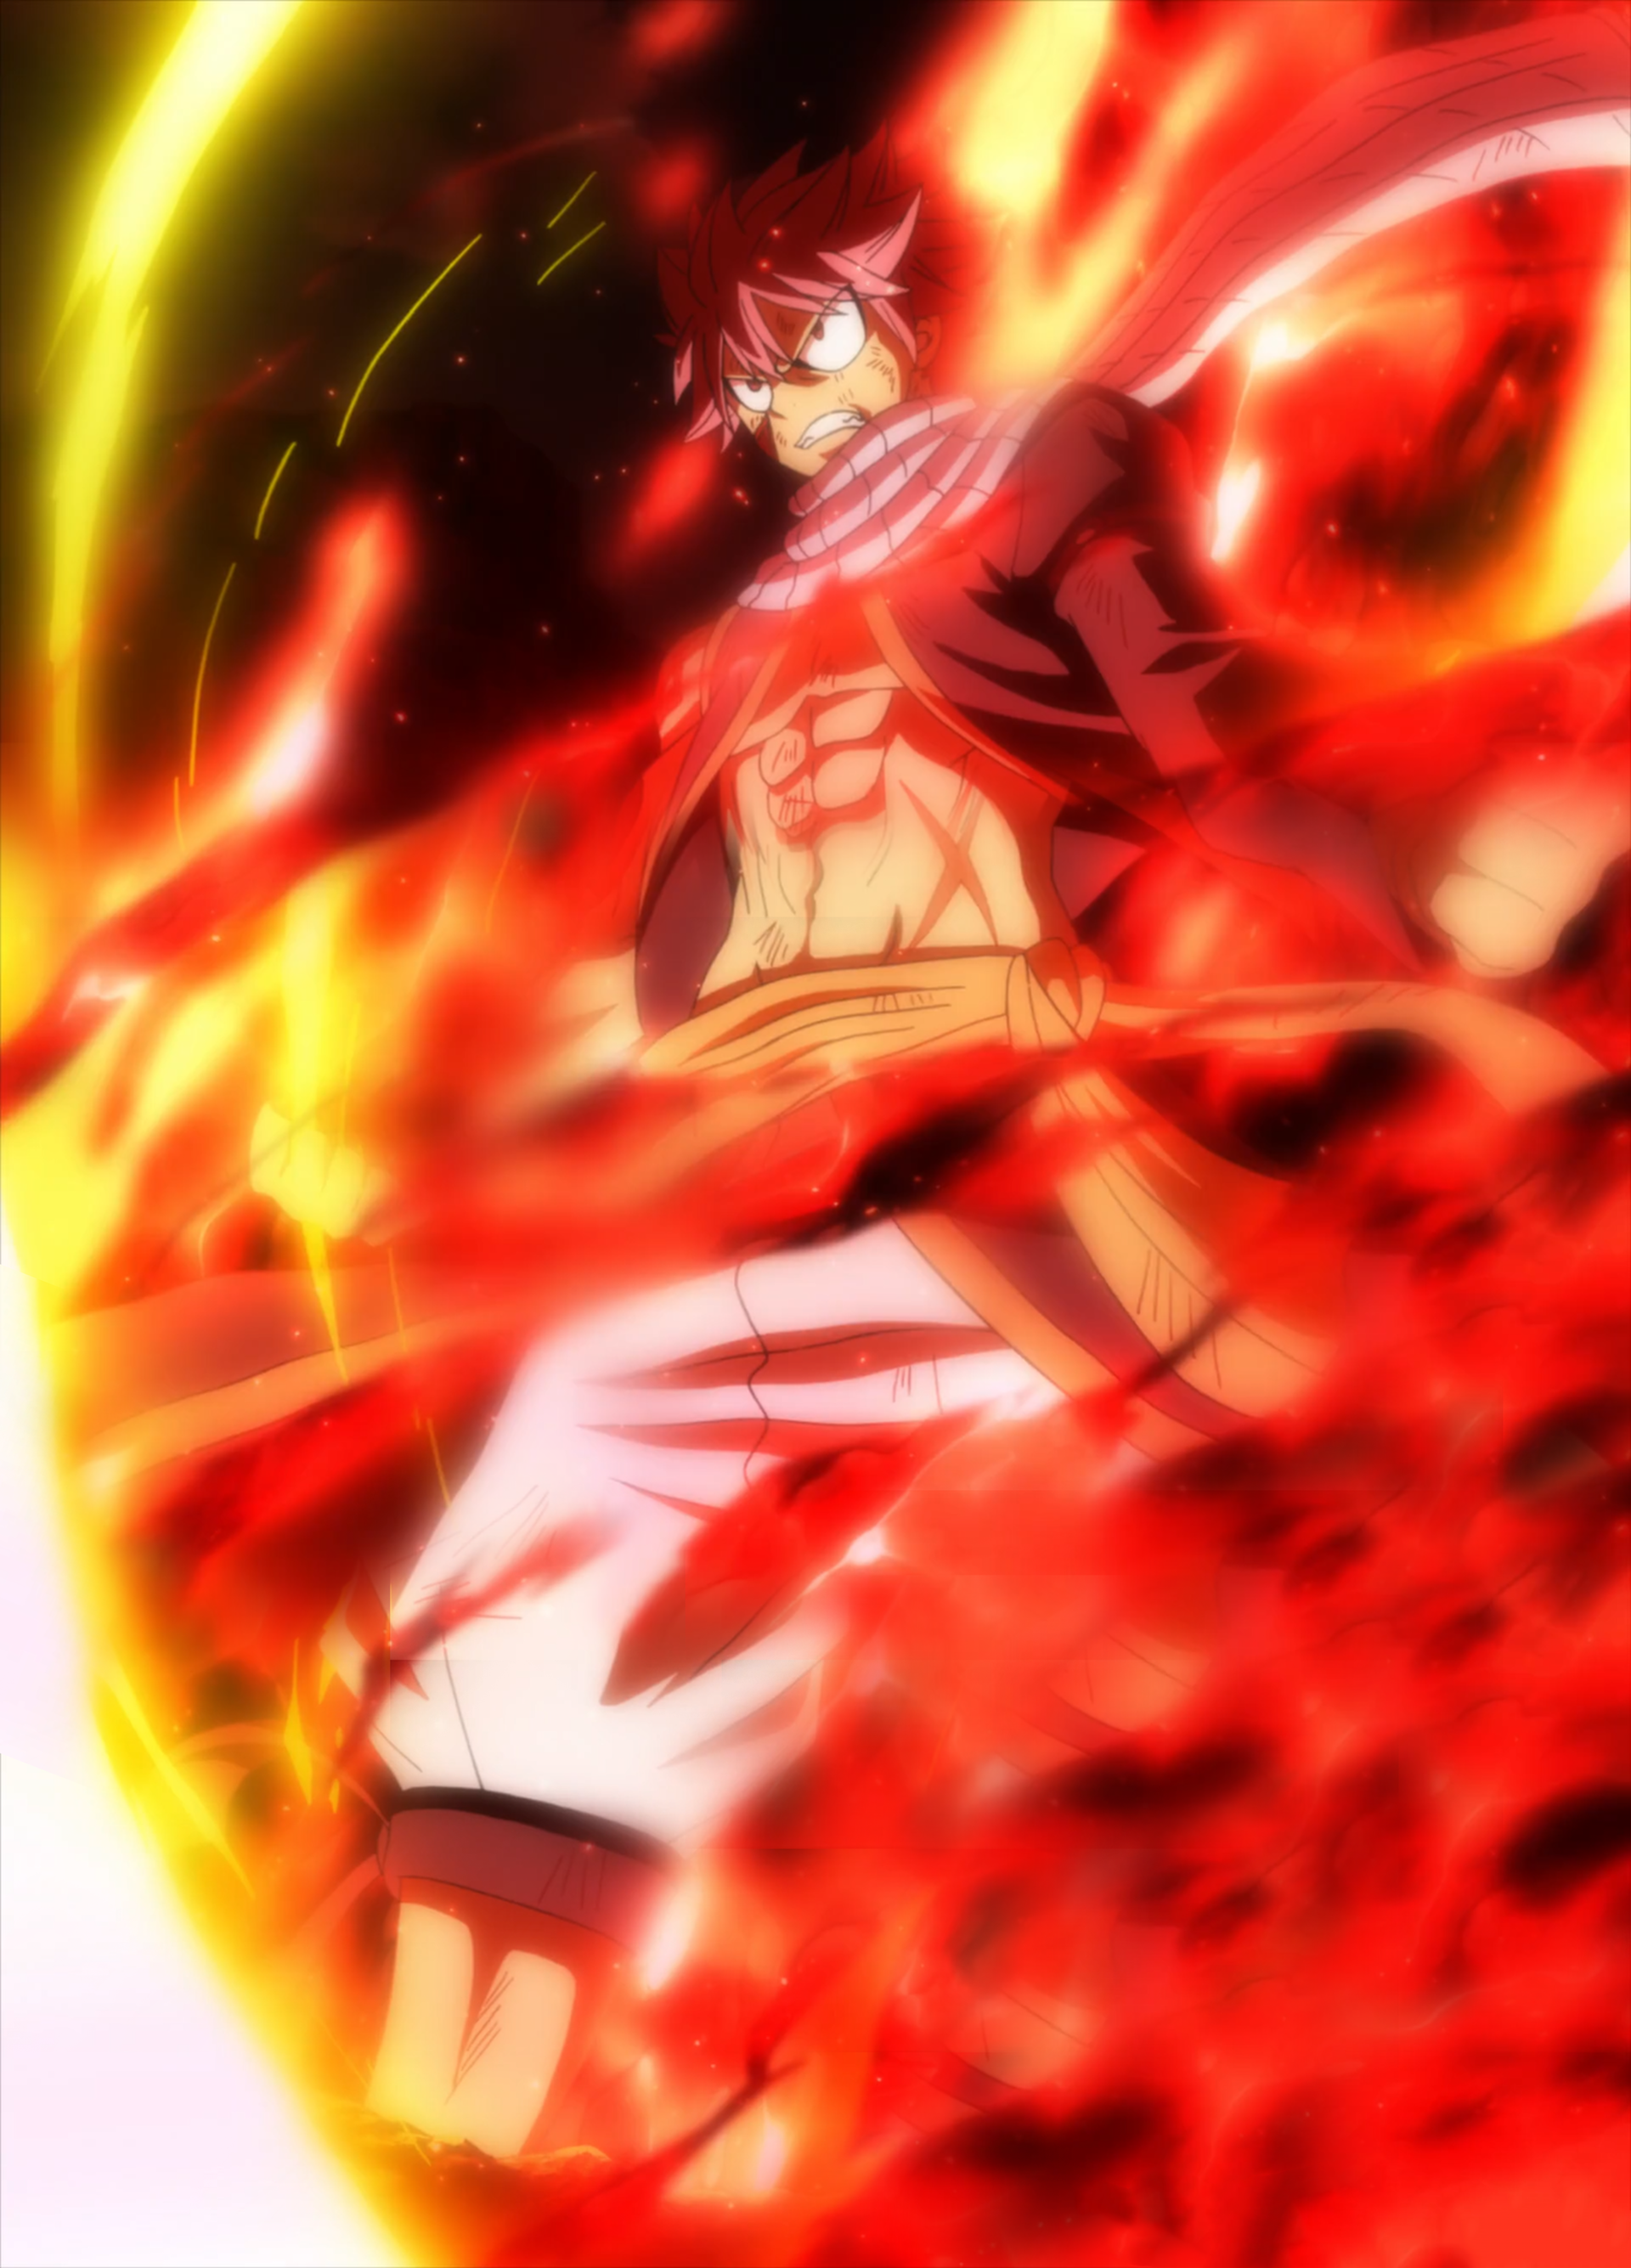 10 Facts about Natsu Dragneel, the Dragon Slayer with Fire Magic